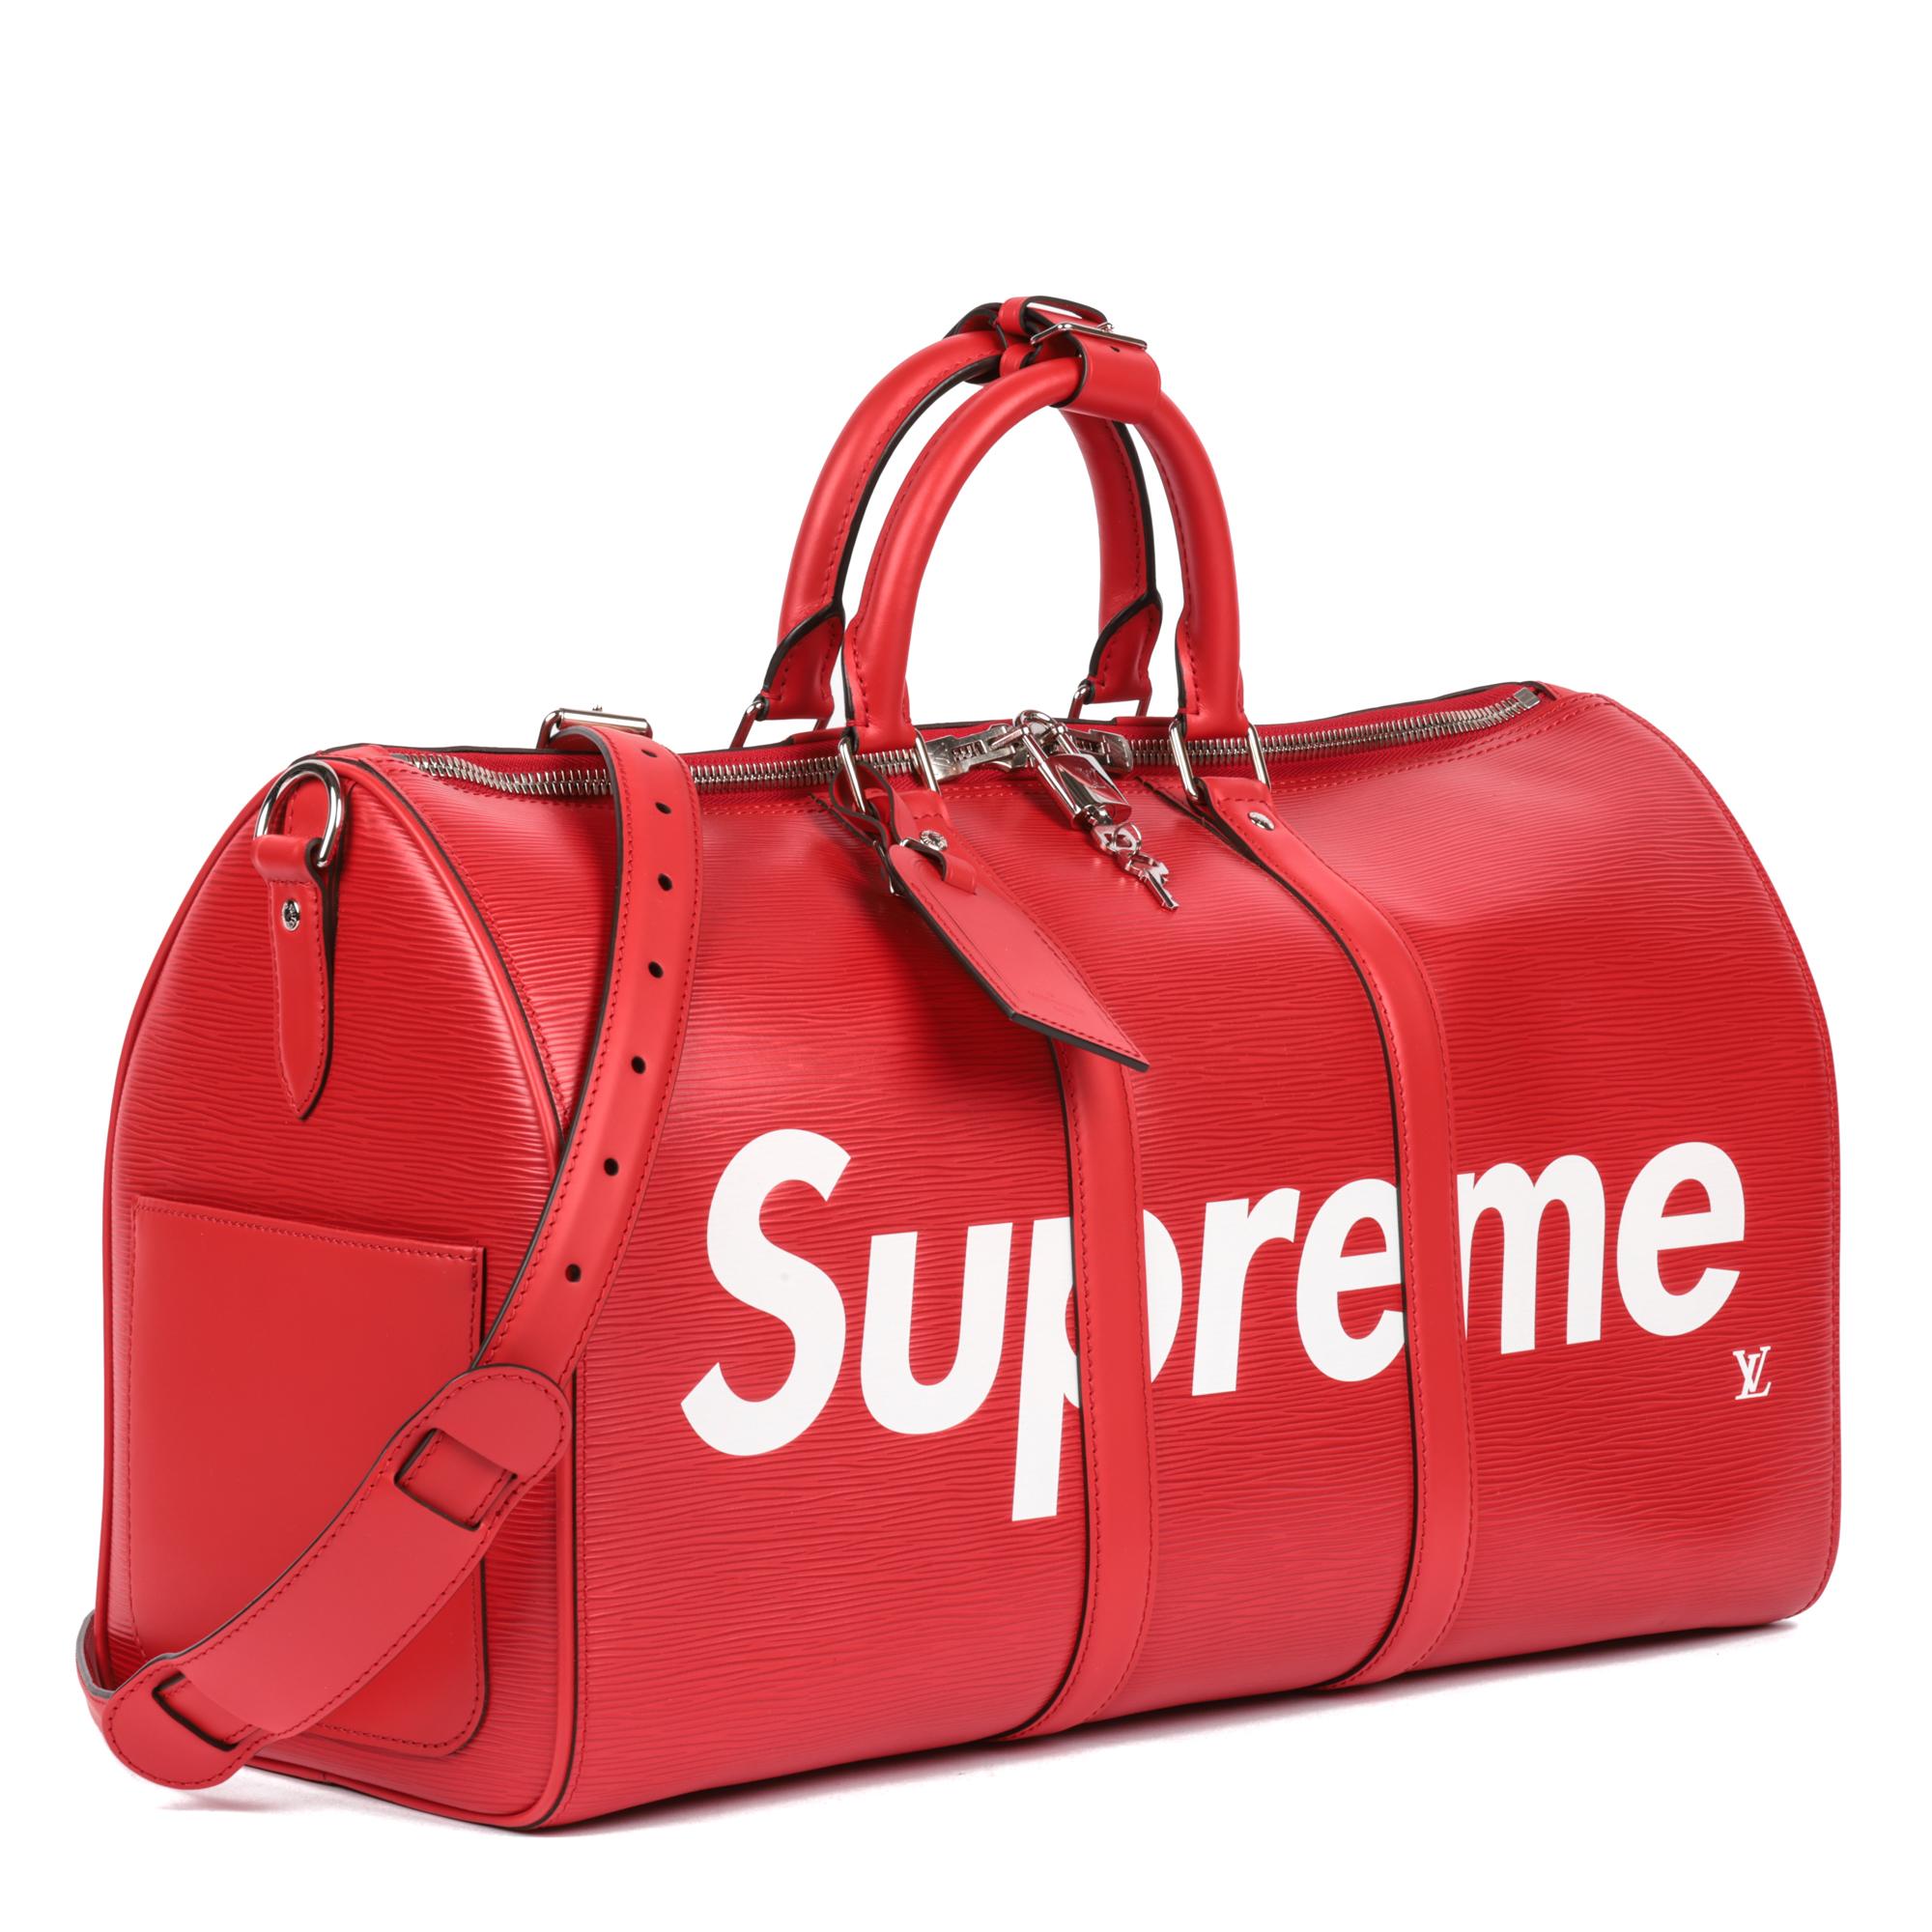 LOUIS VUITTON
X Supreme Red Epi Leather Keepall 45cm Bandouliere

Serial Number: BA2137
Age (Circa): 2017
Accompanied By: Louis Vuitton Dust Bag, Box, Louis Vuitton Invoice, Shoulder Strap, Luggage Tag, Padlock, Keys
Authenticity Details: Date Stamp